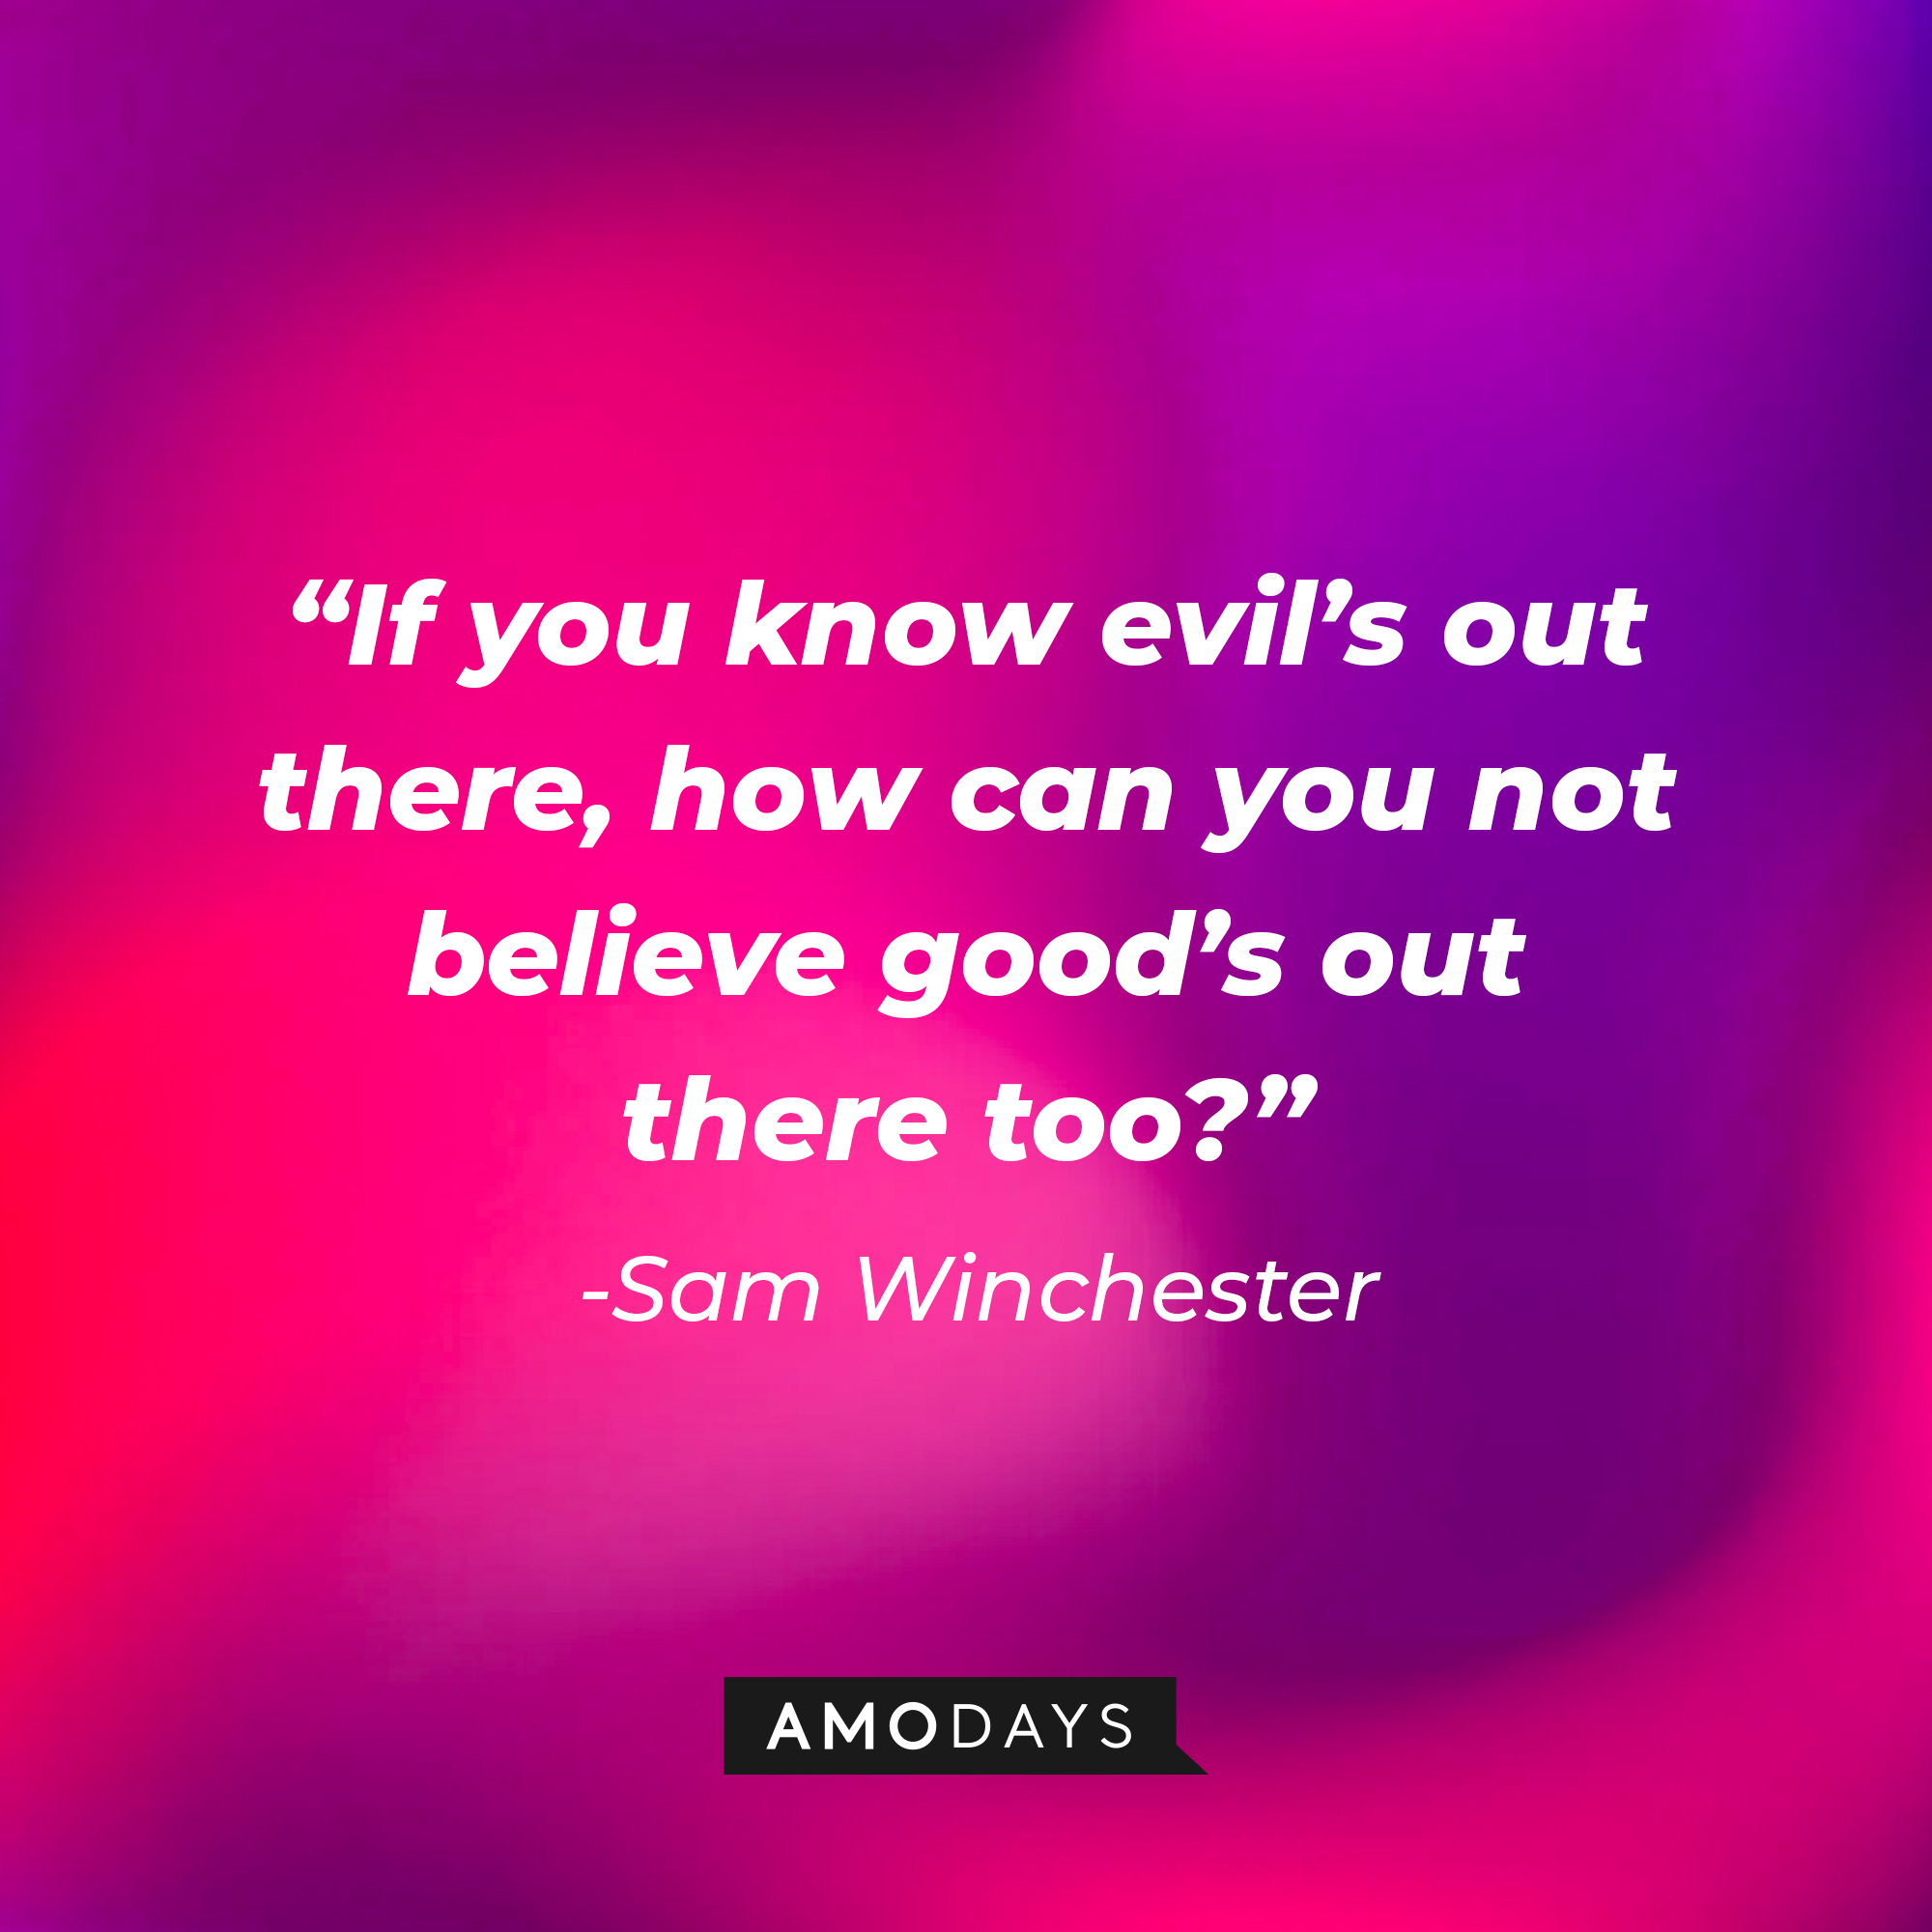 Sam Winchester’s quote: “If you know evil’s out there, how can you not believe good’s out there too?” | Source: AmoDays